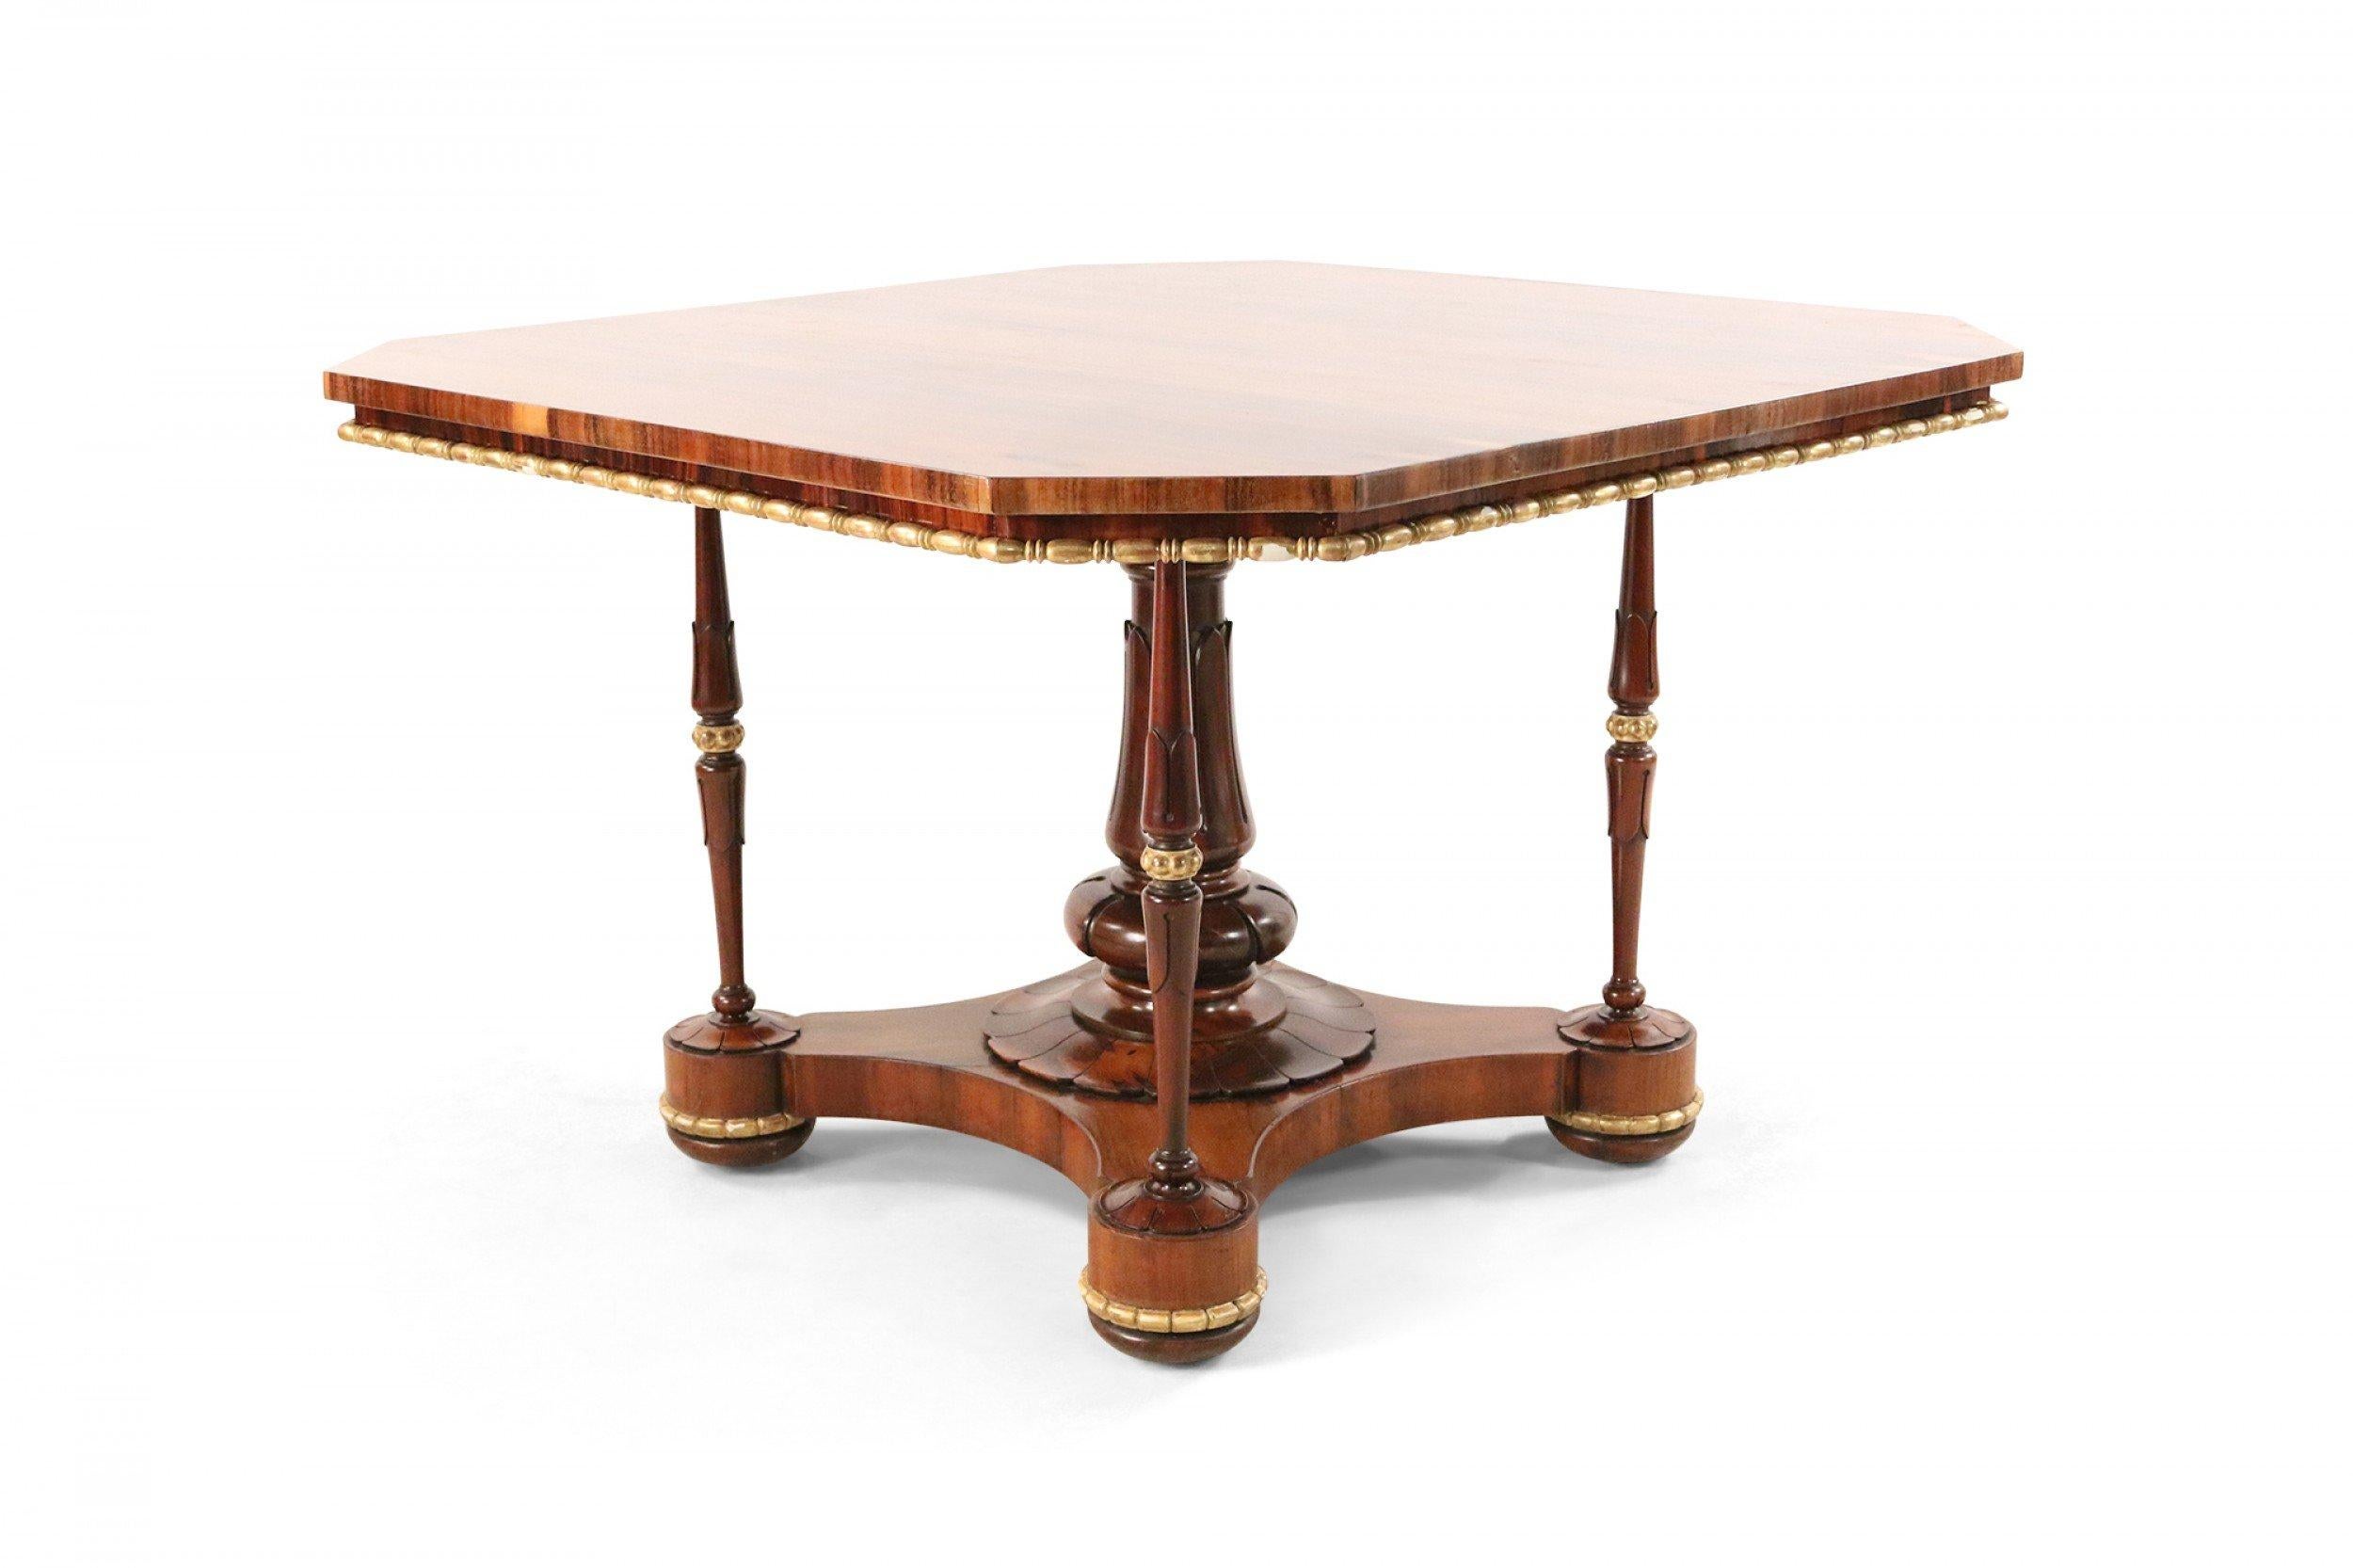 English Regency Square Canted Corner Walnut and Brass Trim Center Table For Sale 1